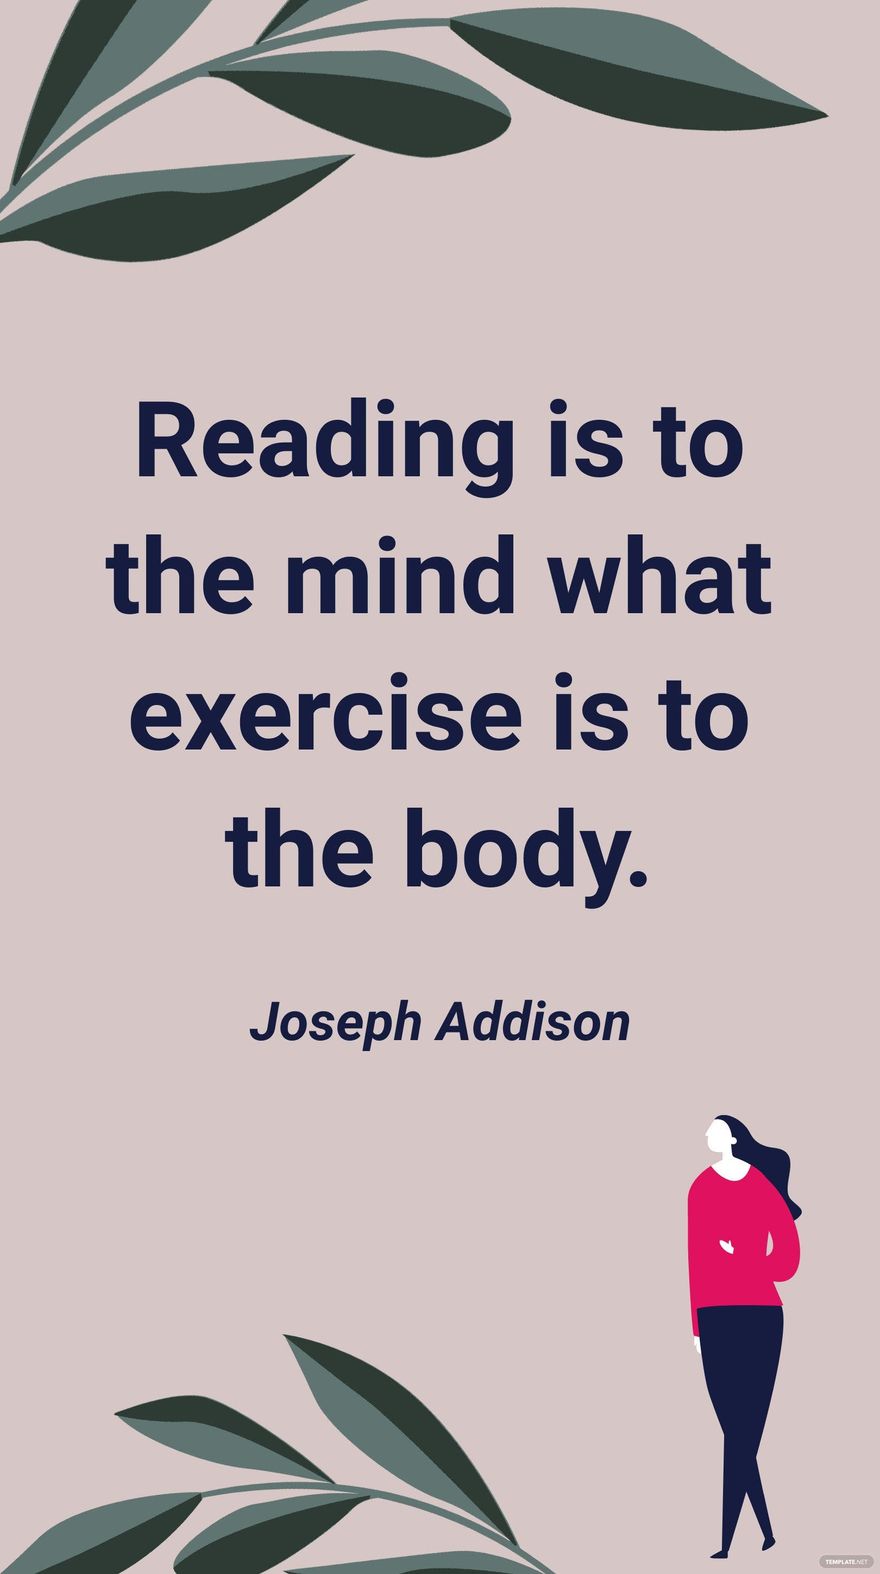 Joseph Addison - Reading is to the mind what exercise is to the body.